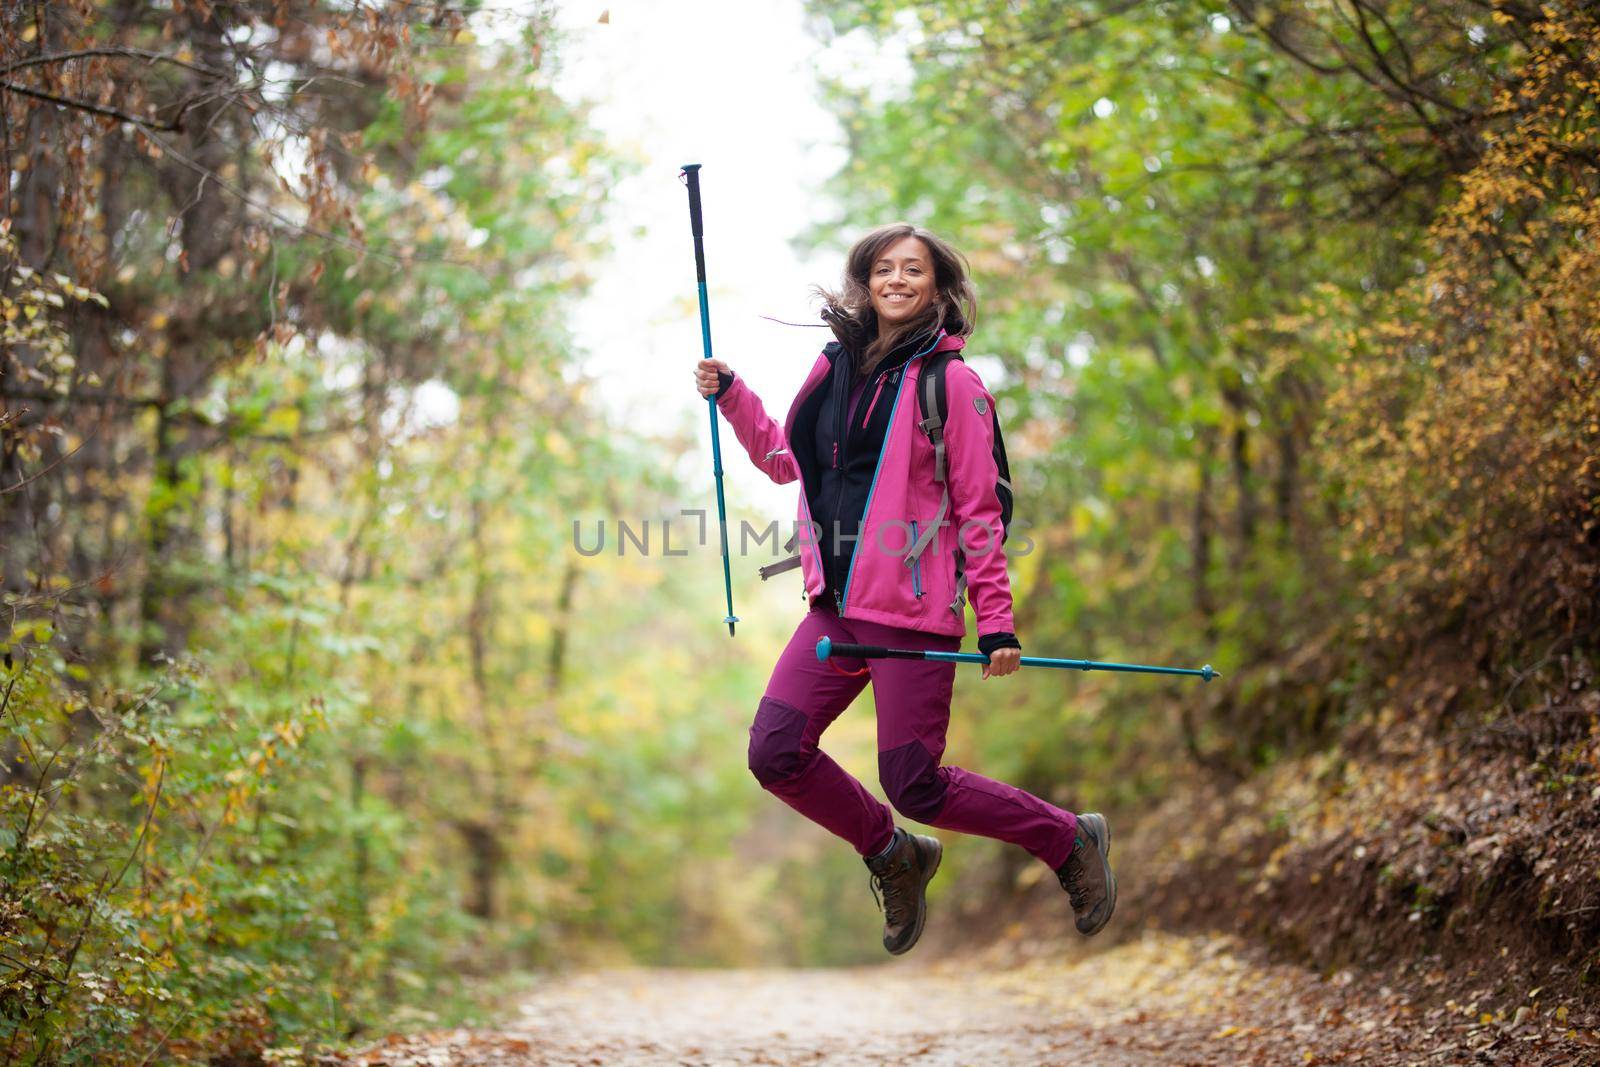 Hiker girl jumping on a trail in the mountains. Backpacker with hiking poles and pink jacket in a forest. Happy lifestyle outdoors. by kokimk